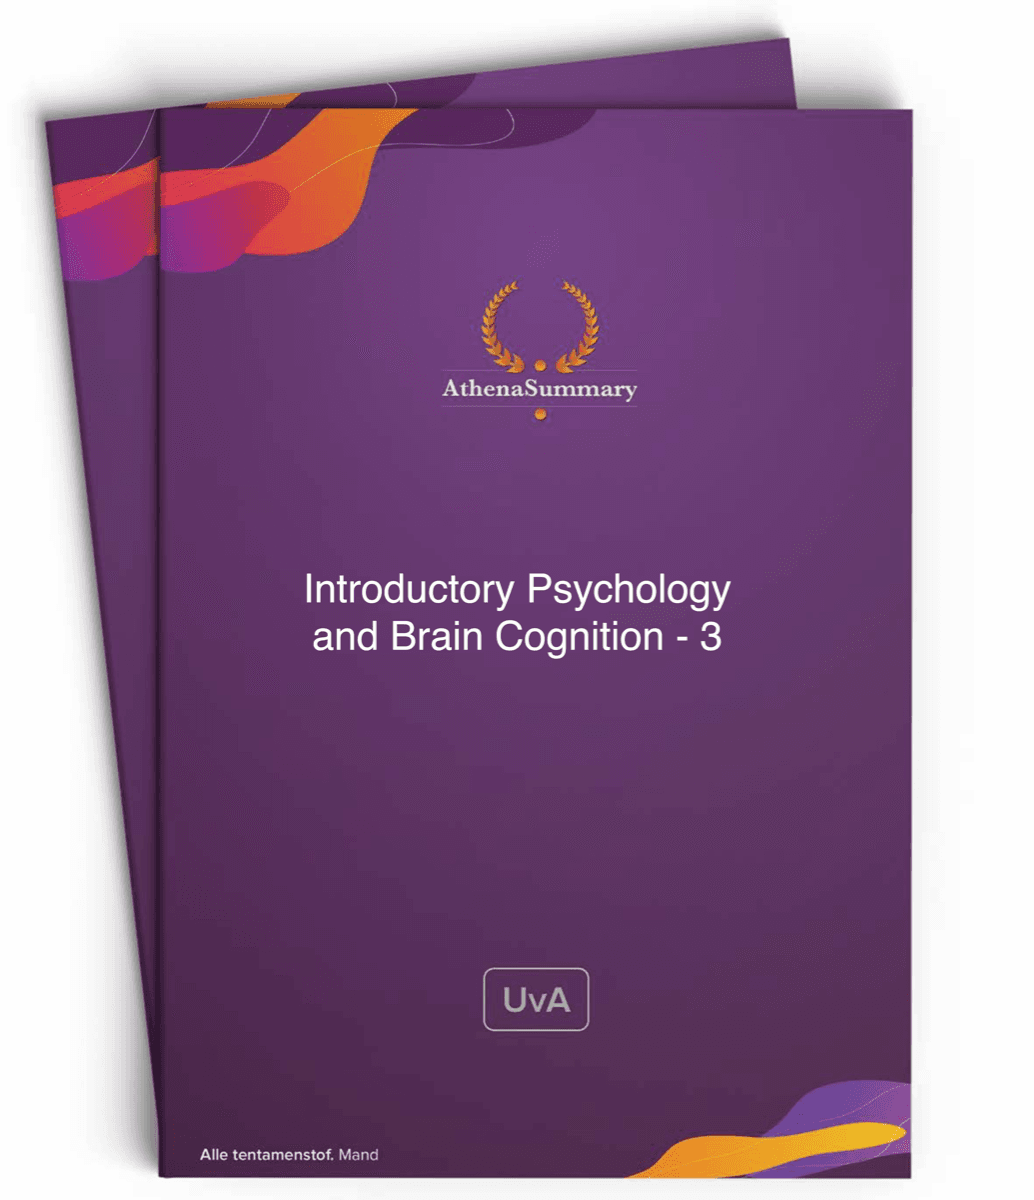 Literature Summary: Introductory Psychology and Brain & Cognition - 3